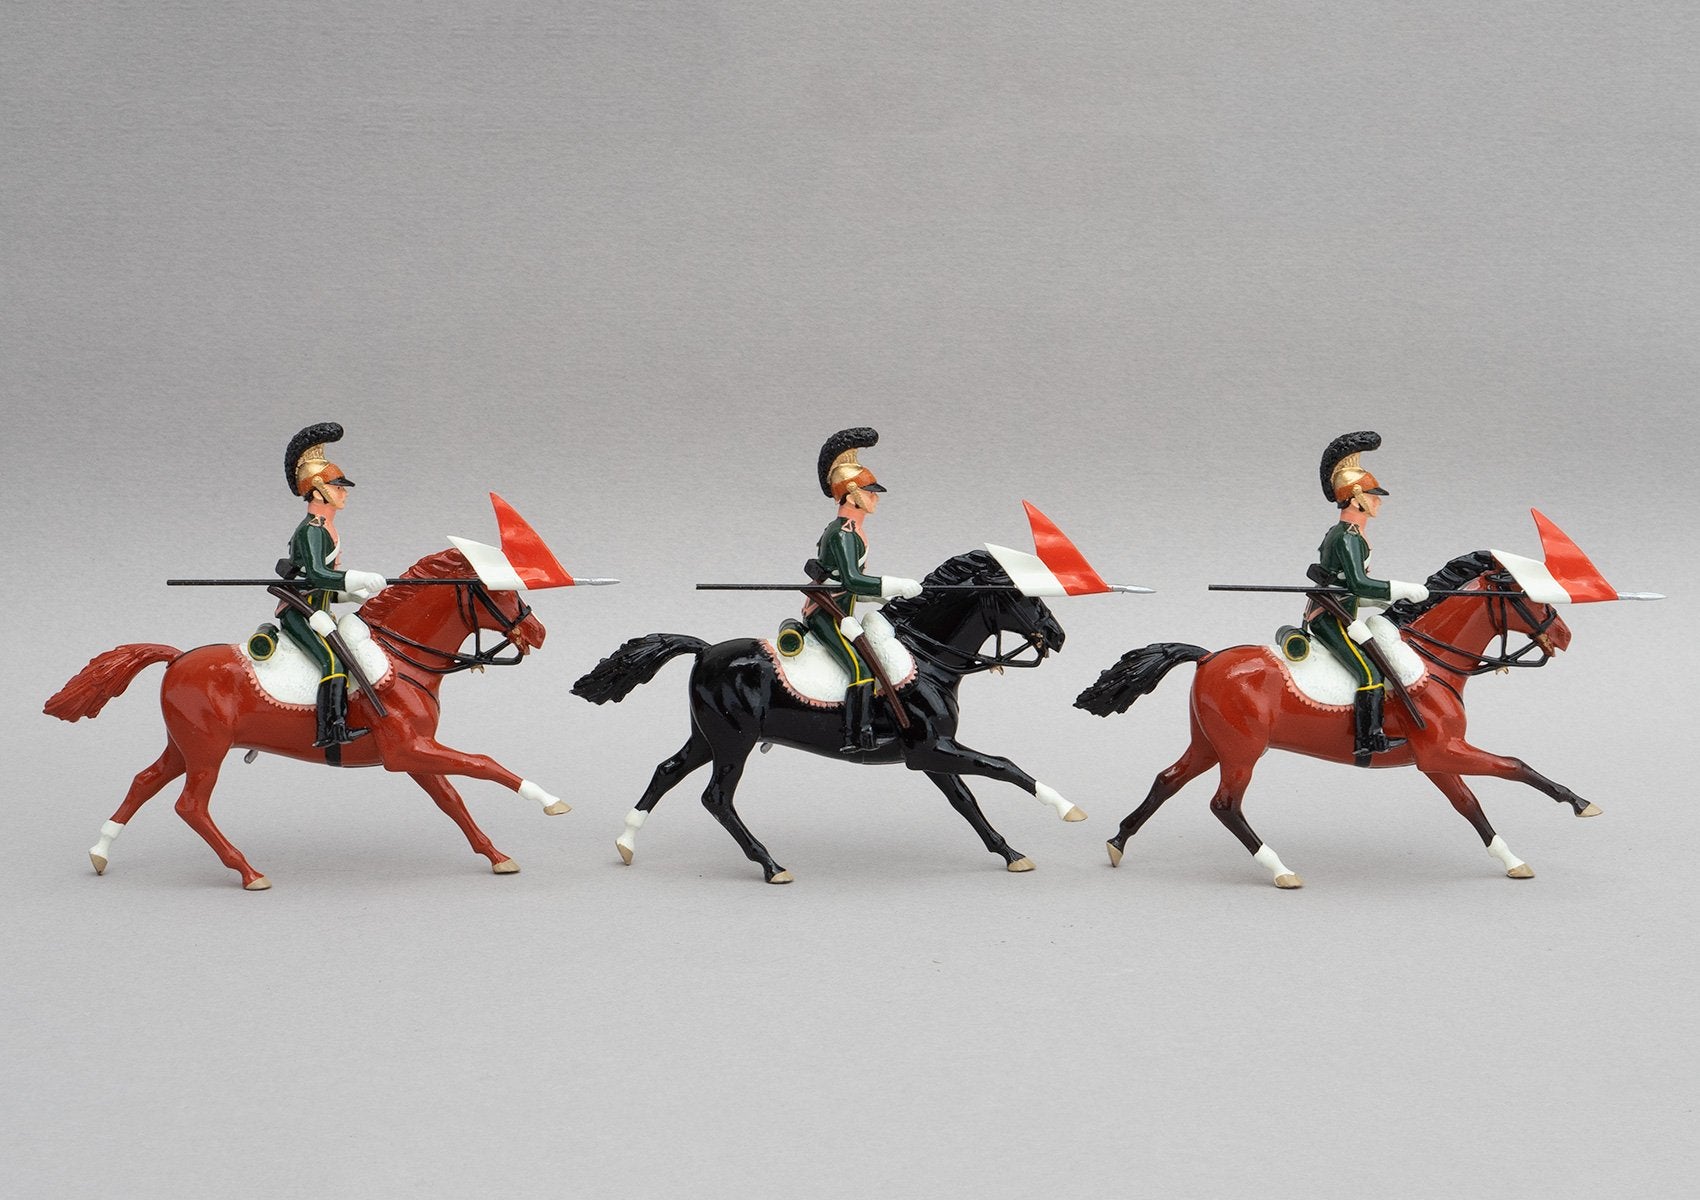 Set 131 3rd Chevau-Legers Lancers | French Cavalry | Napoleonic Wars | Commanded by Colonel Martigue, and attached to the 1st Corps of the Grande Armee. Three mounted cavalrymen lances adorned with red and white pennants | Waterloo | © Imperial Productions | Sculpt by David Cowe